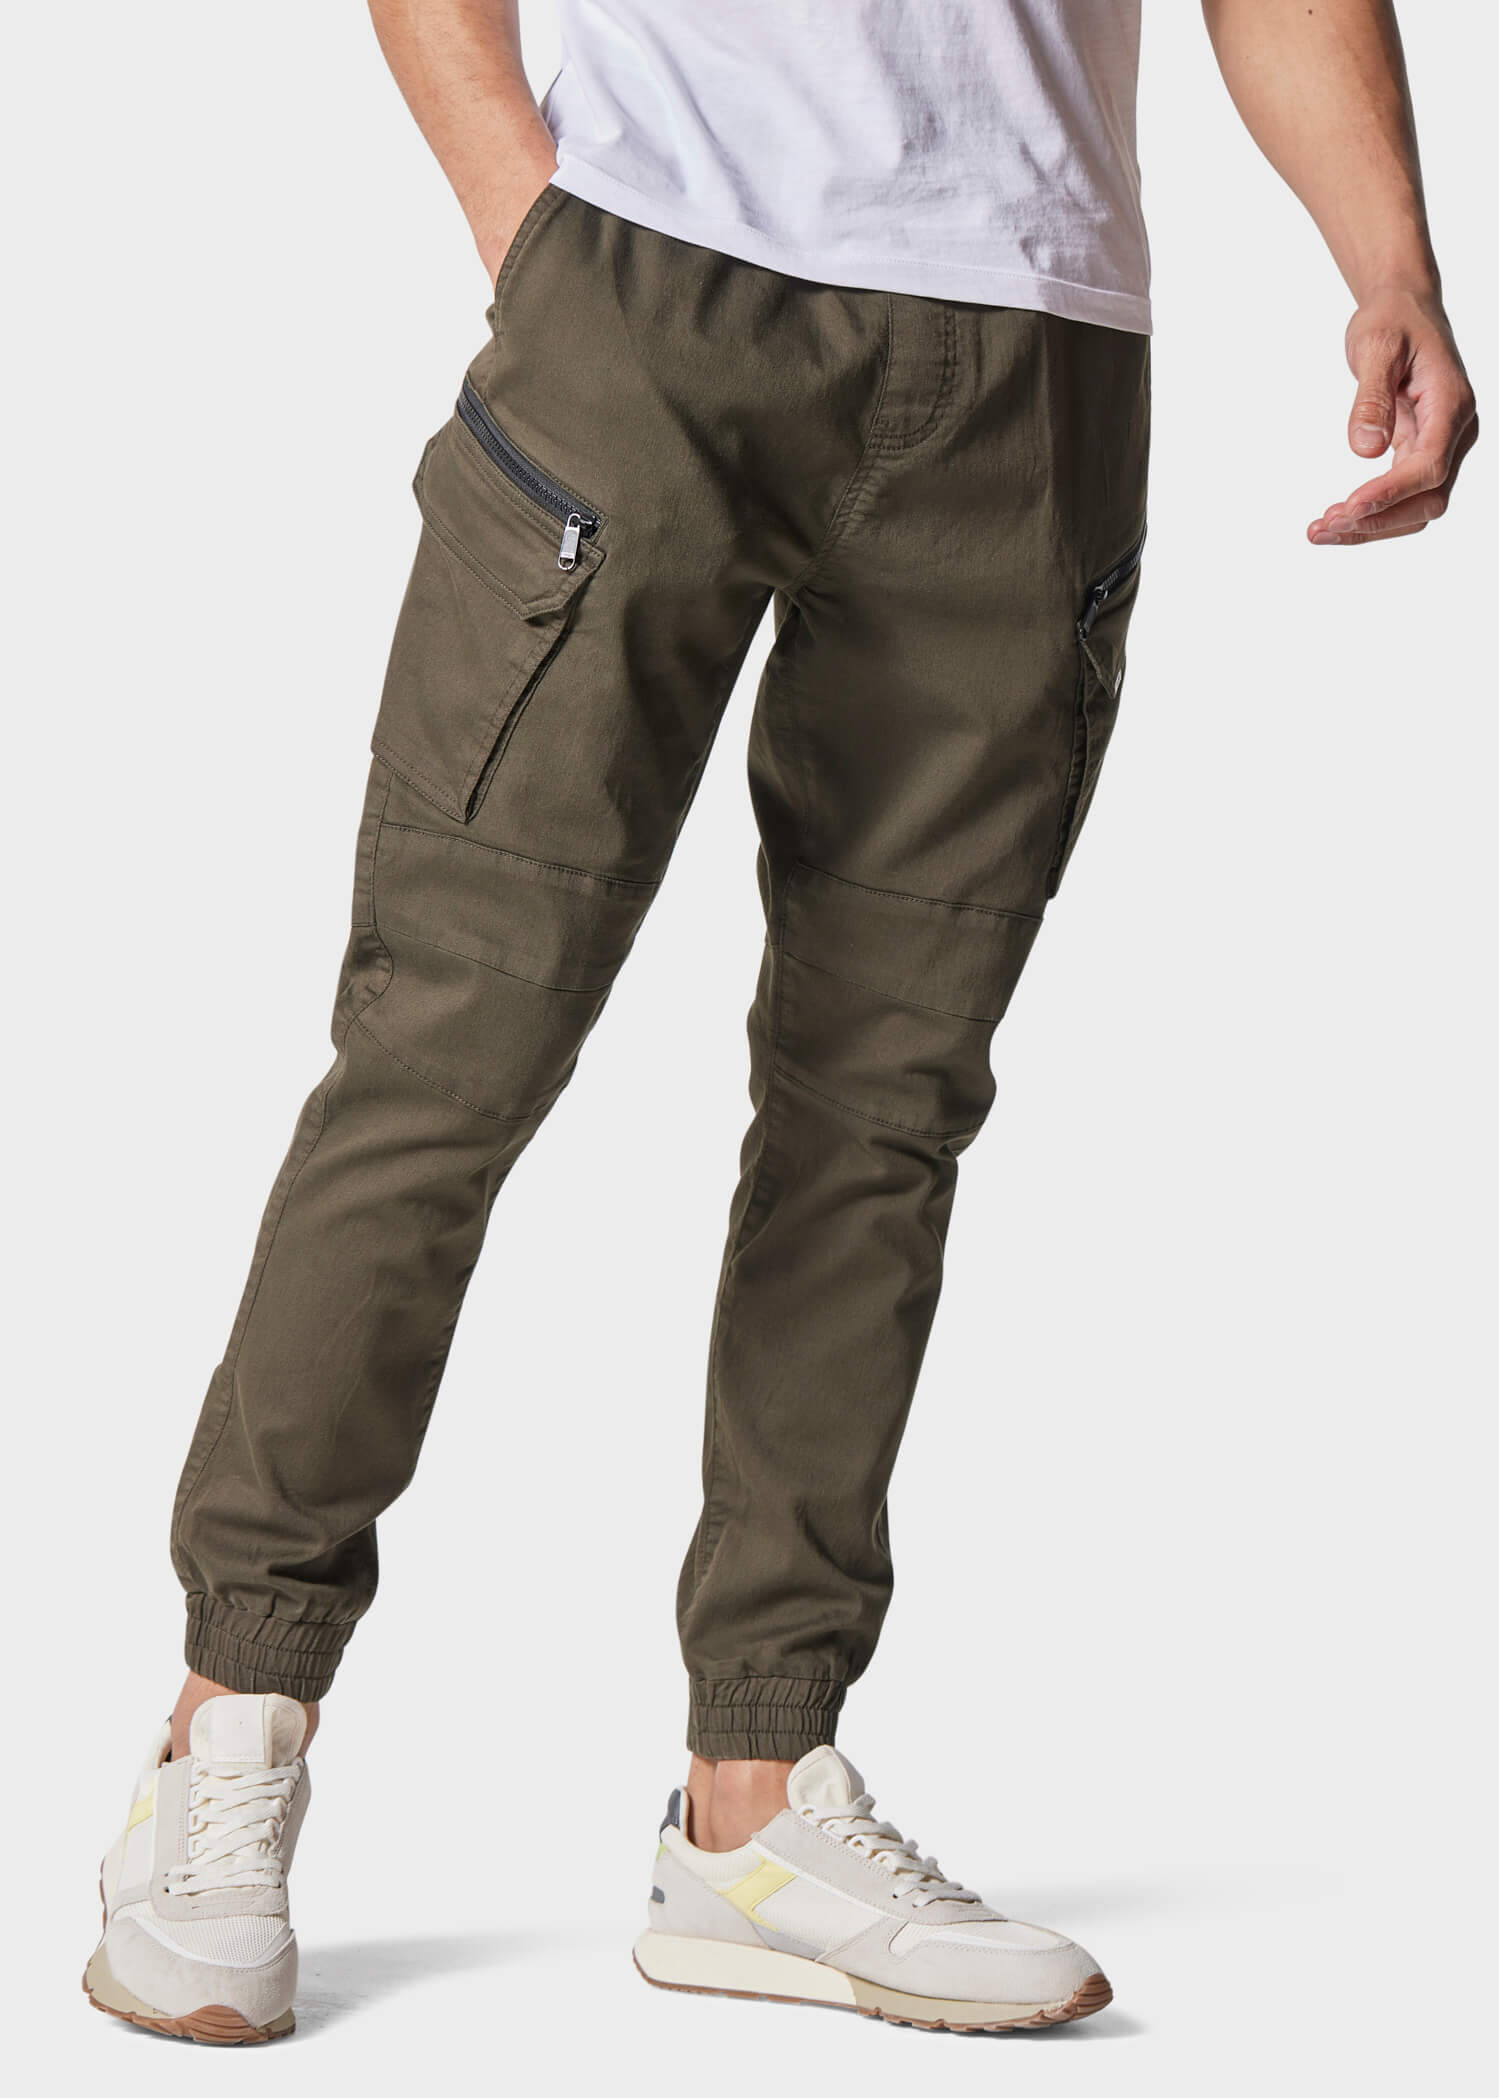 Buy Police Cargo Pants Online In India  Etsy India